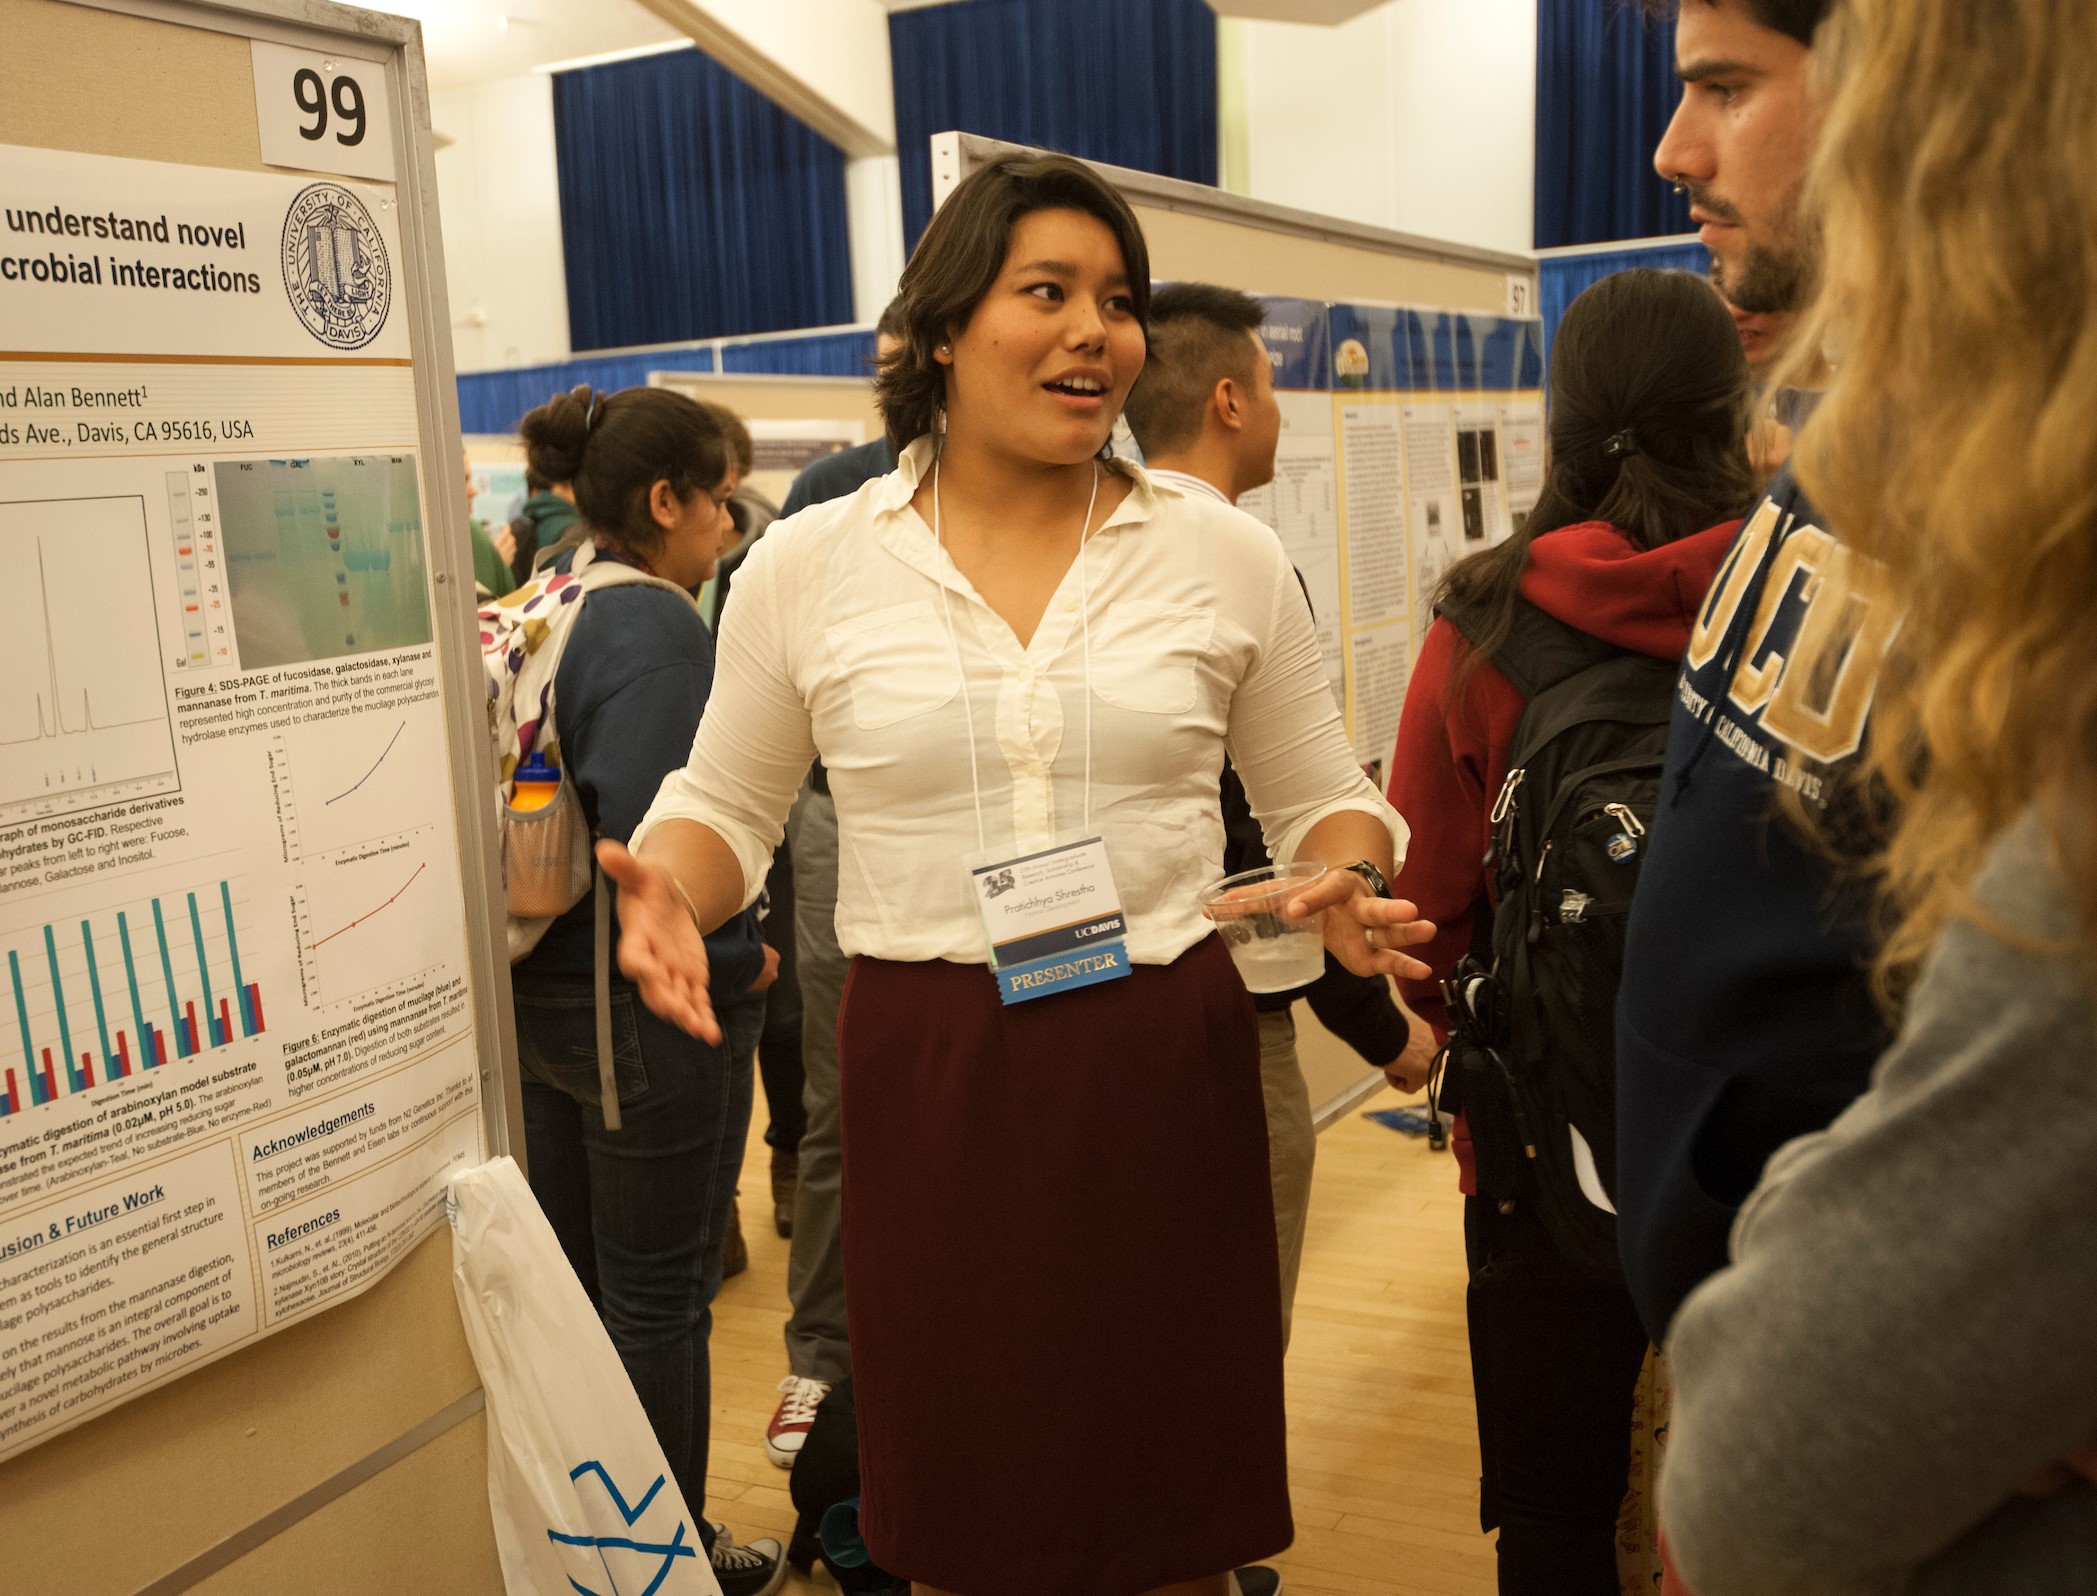 Woman talking in front of her scientific poster